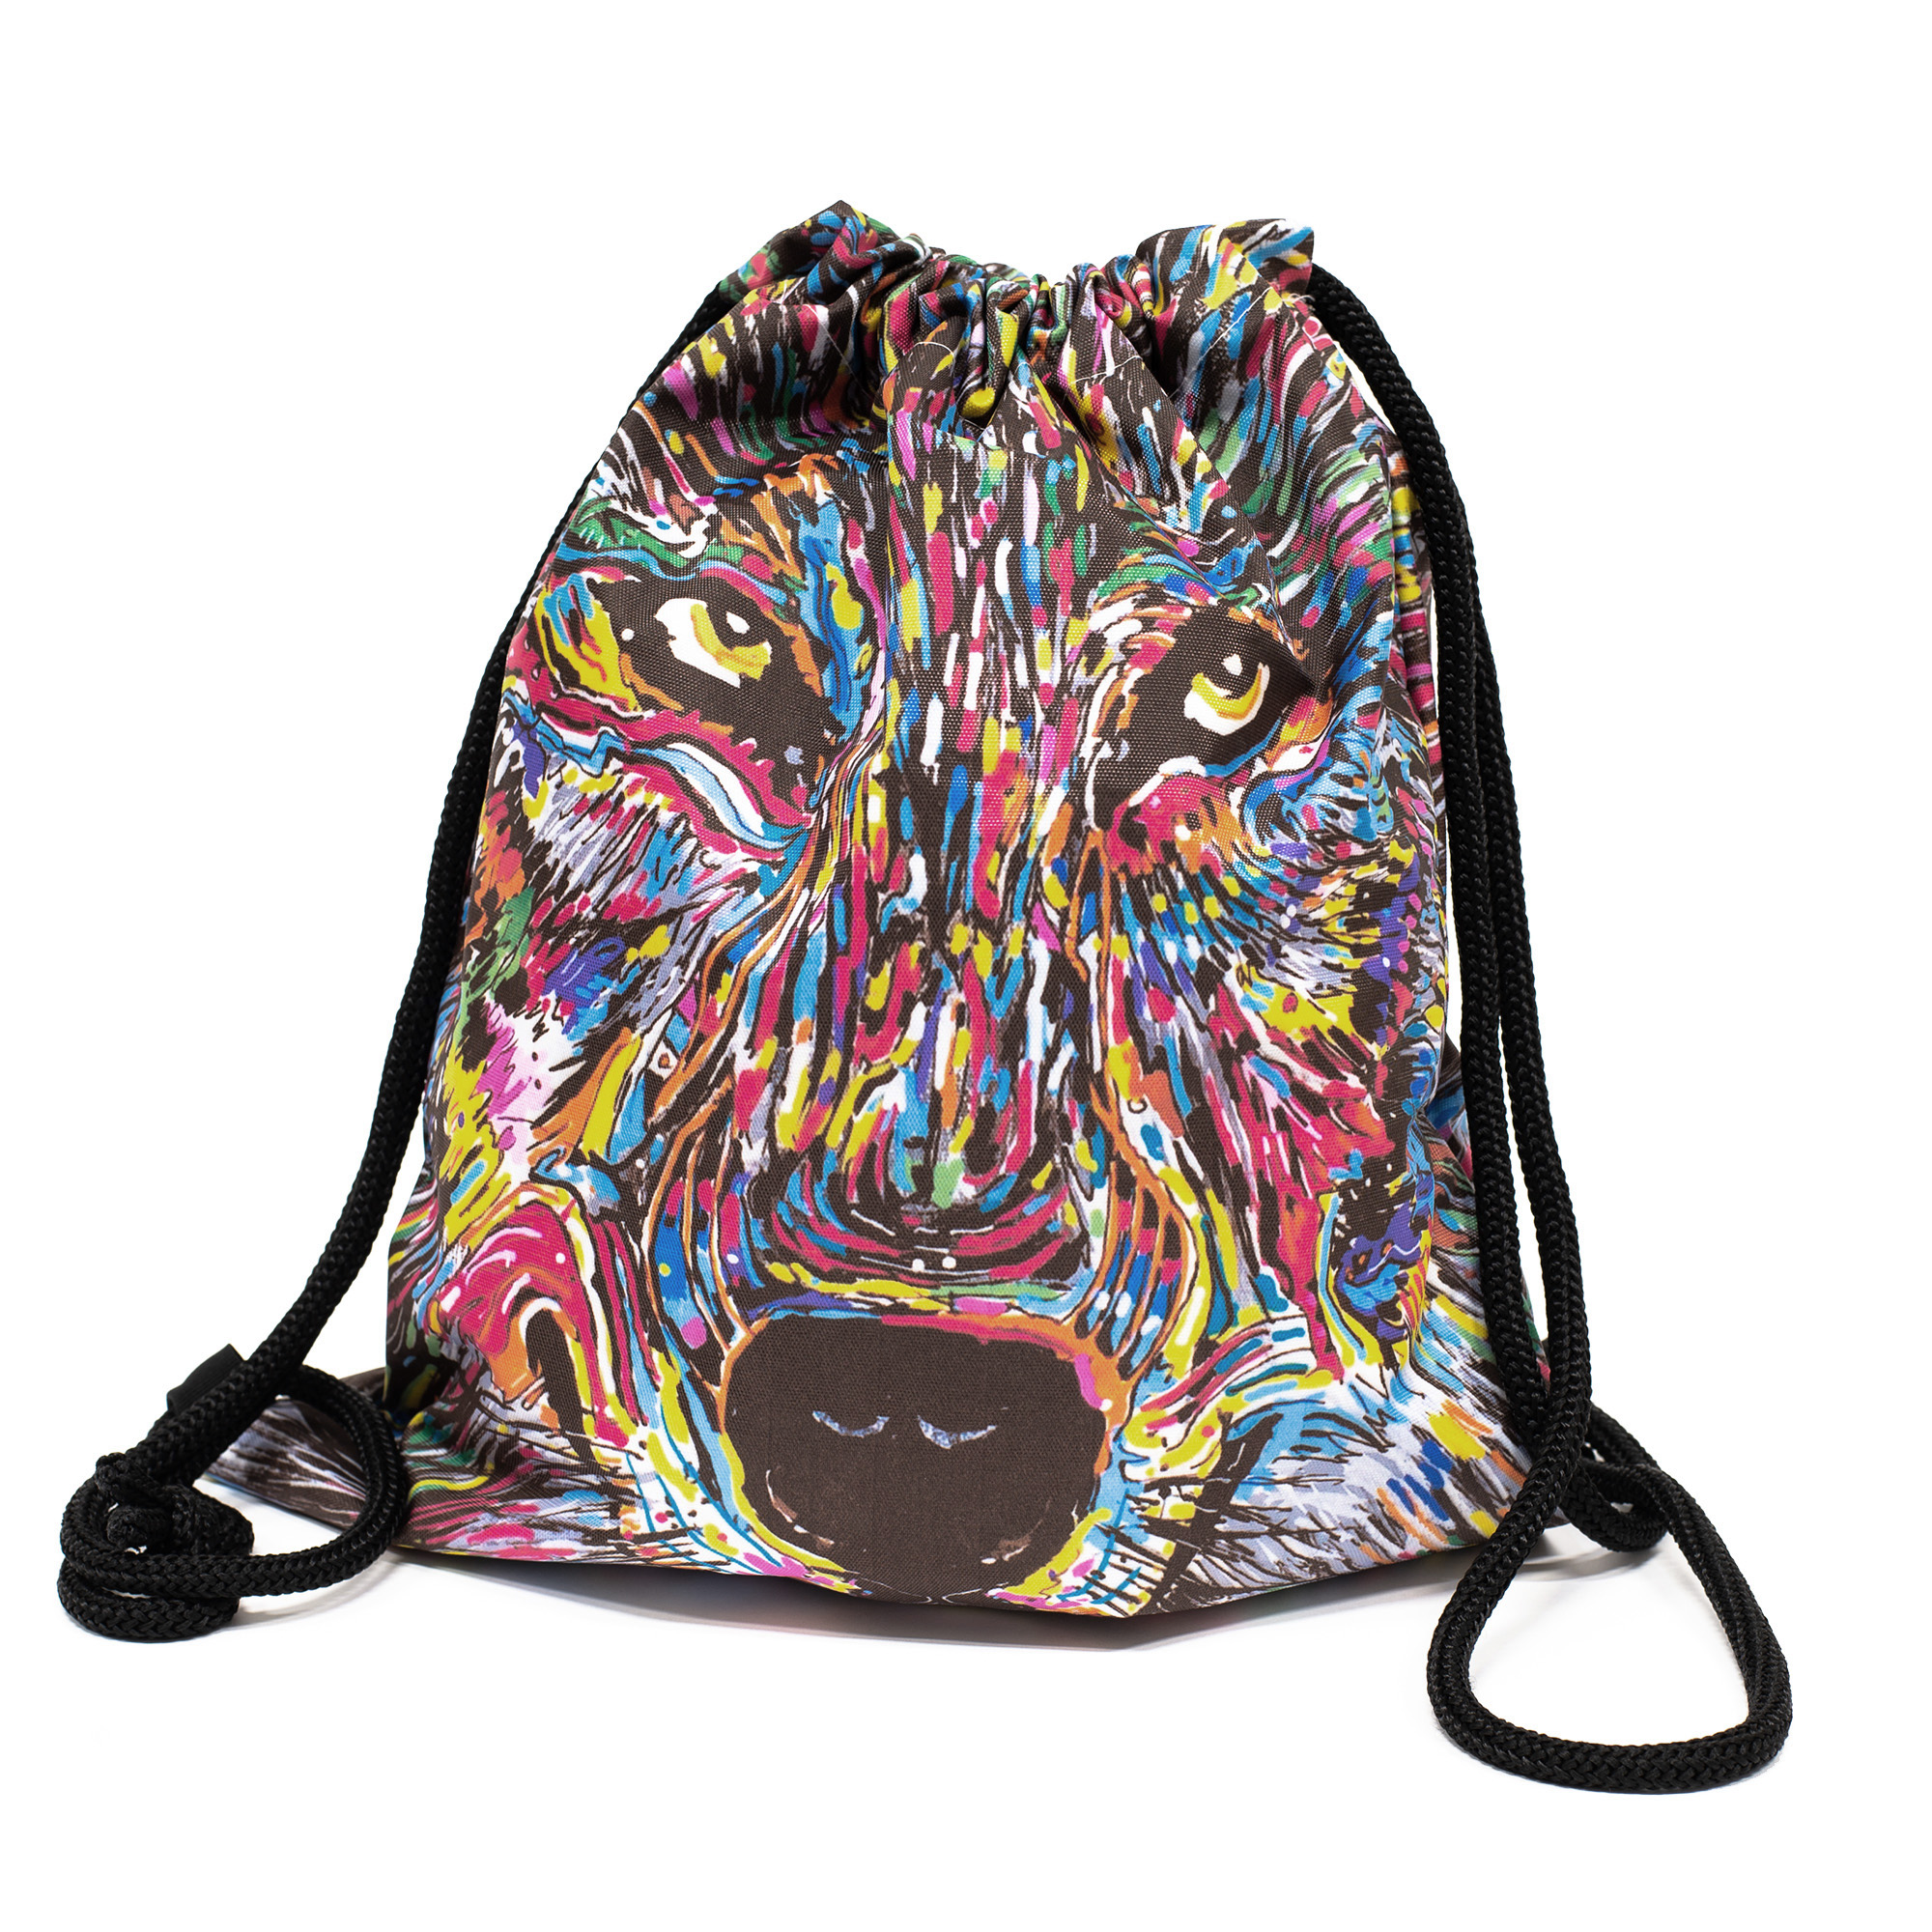 Gemello Store Official GYMSACK LUPO